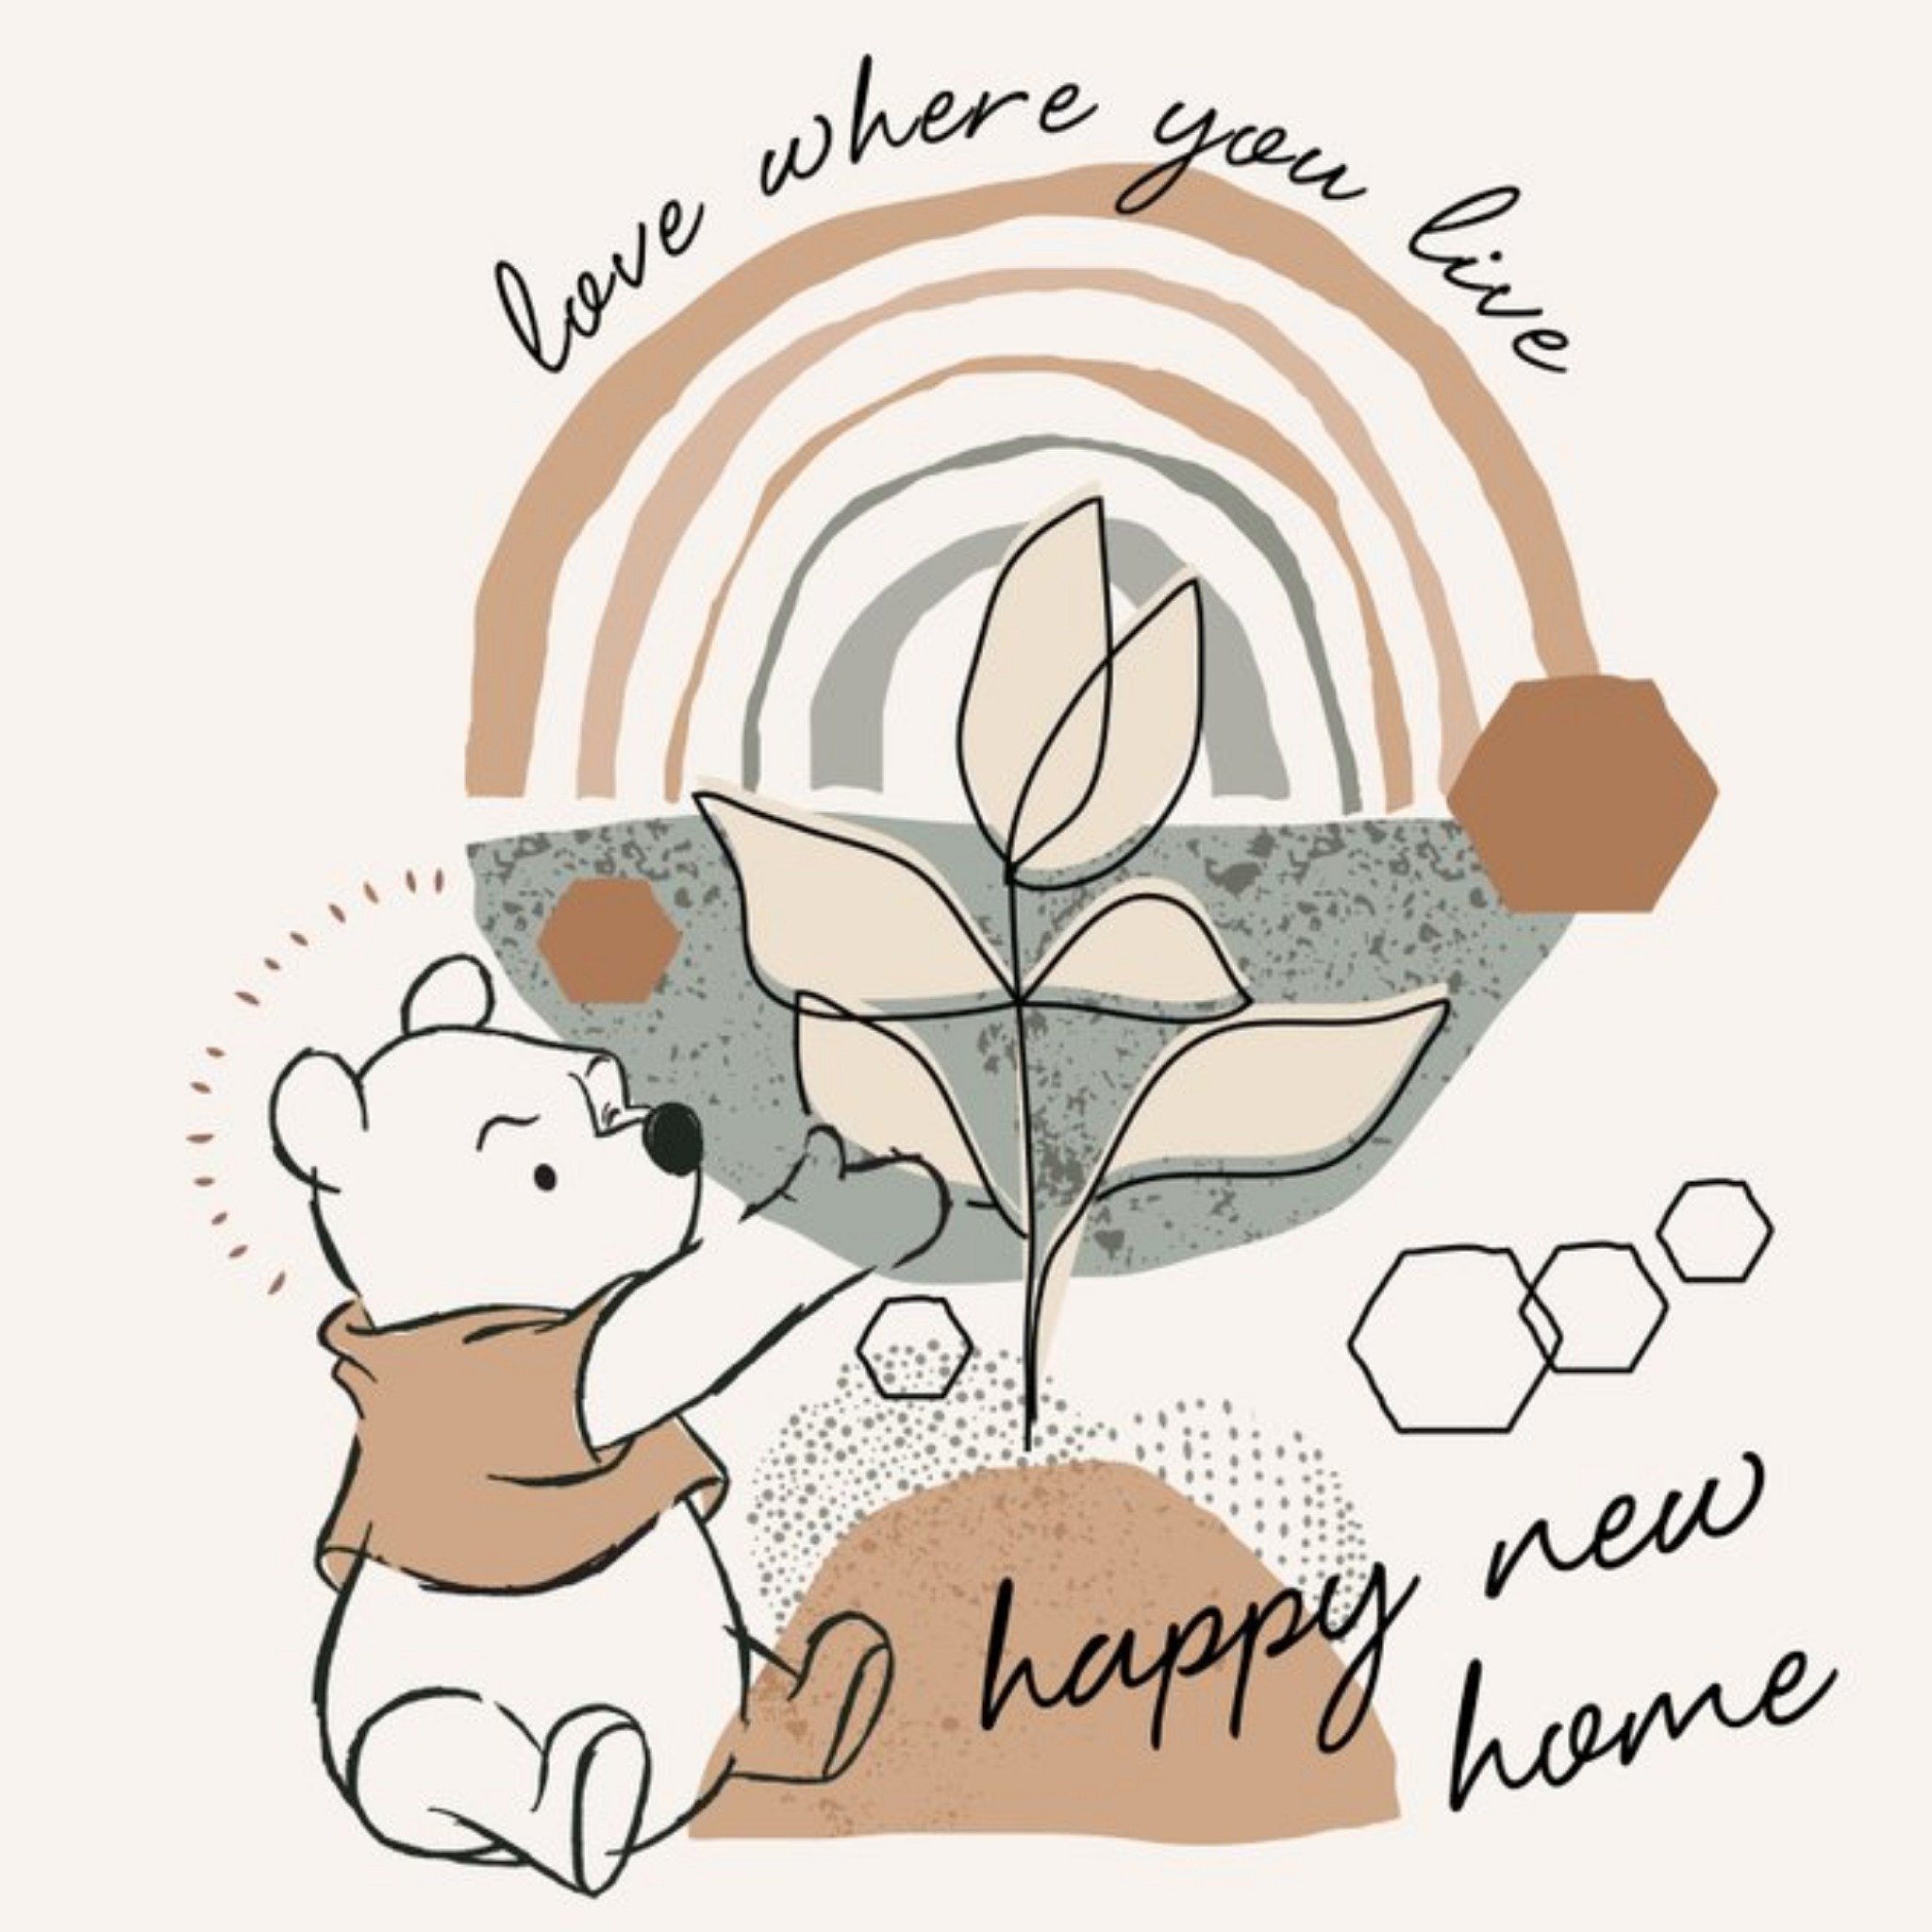 Disney Winnie The Pooh And Piglet Abstract Illustration New Home Card, Large